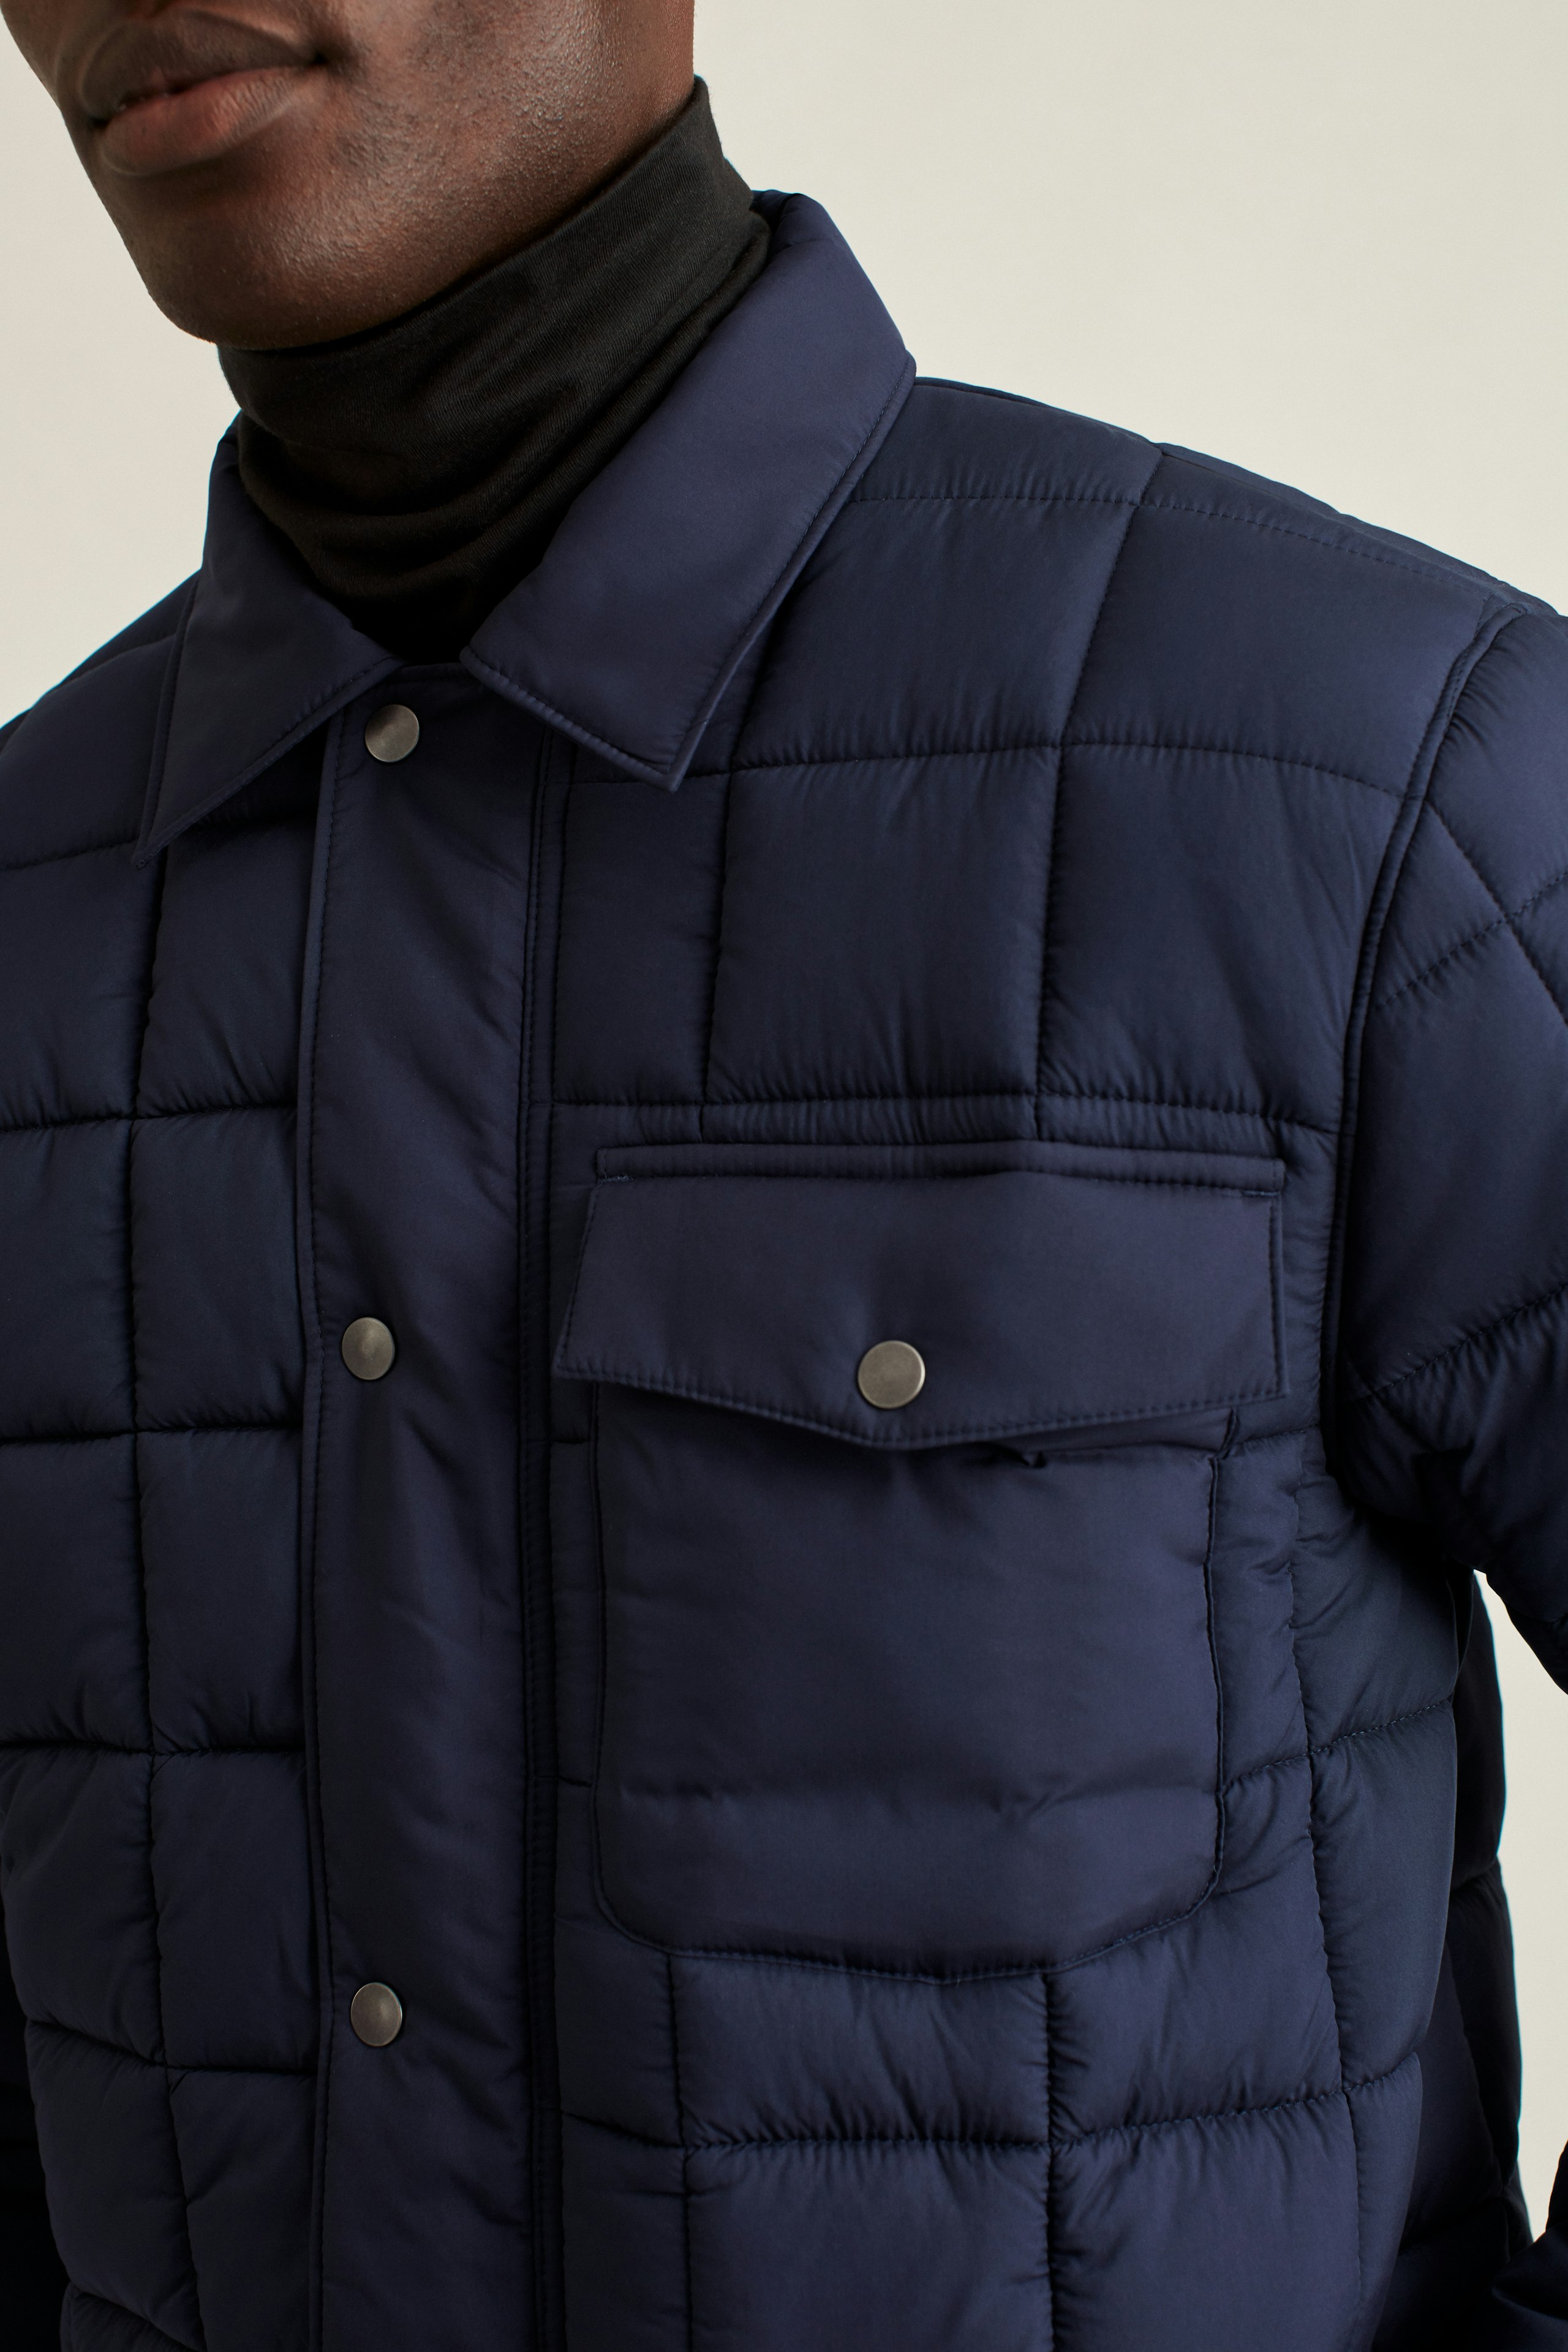 The Quilted Jacket